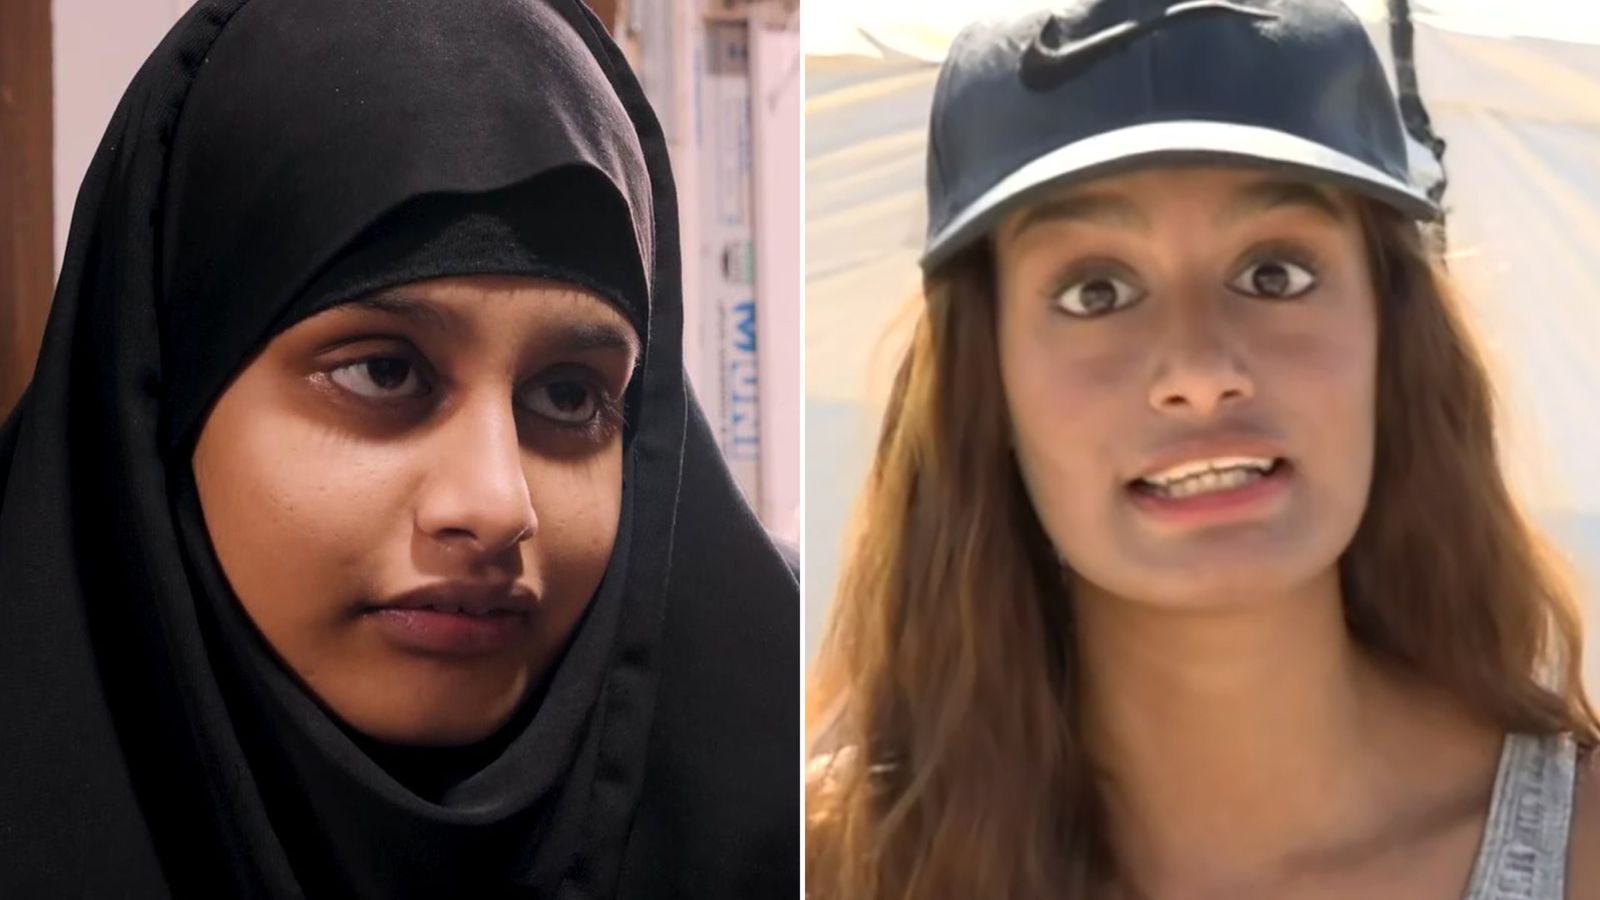 Shamima Begum's mother Asma says her 'world fell apart' when she ran away to join ISIS in Syria